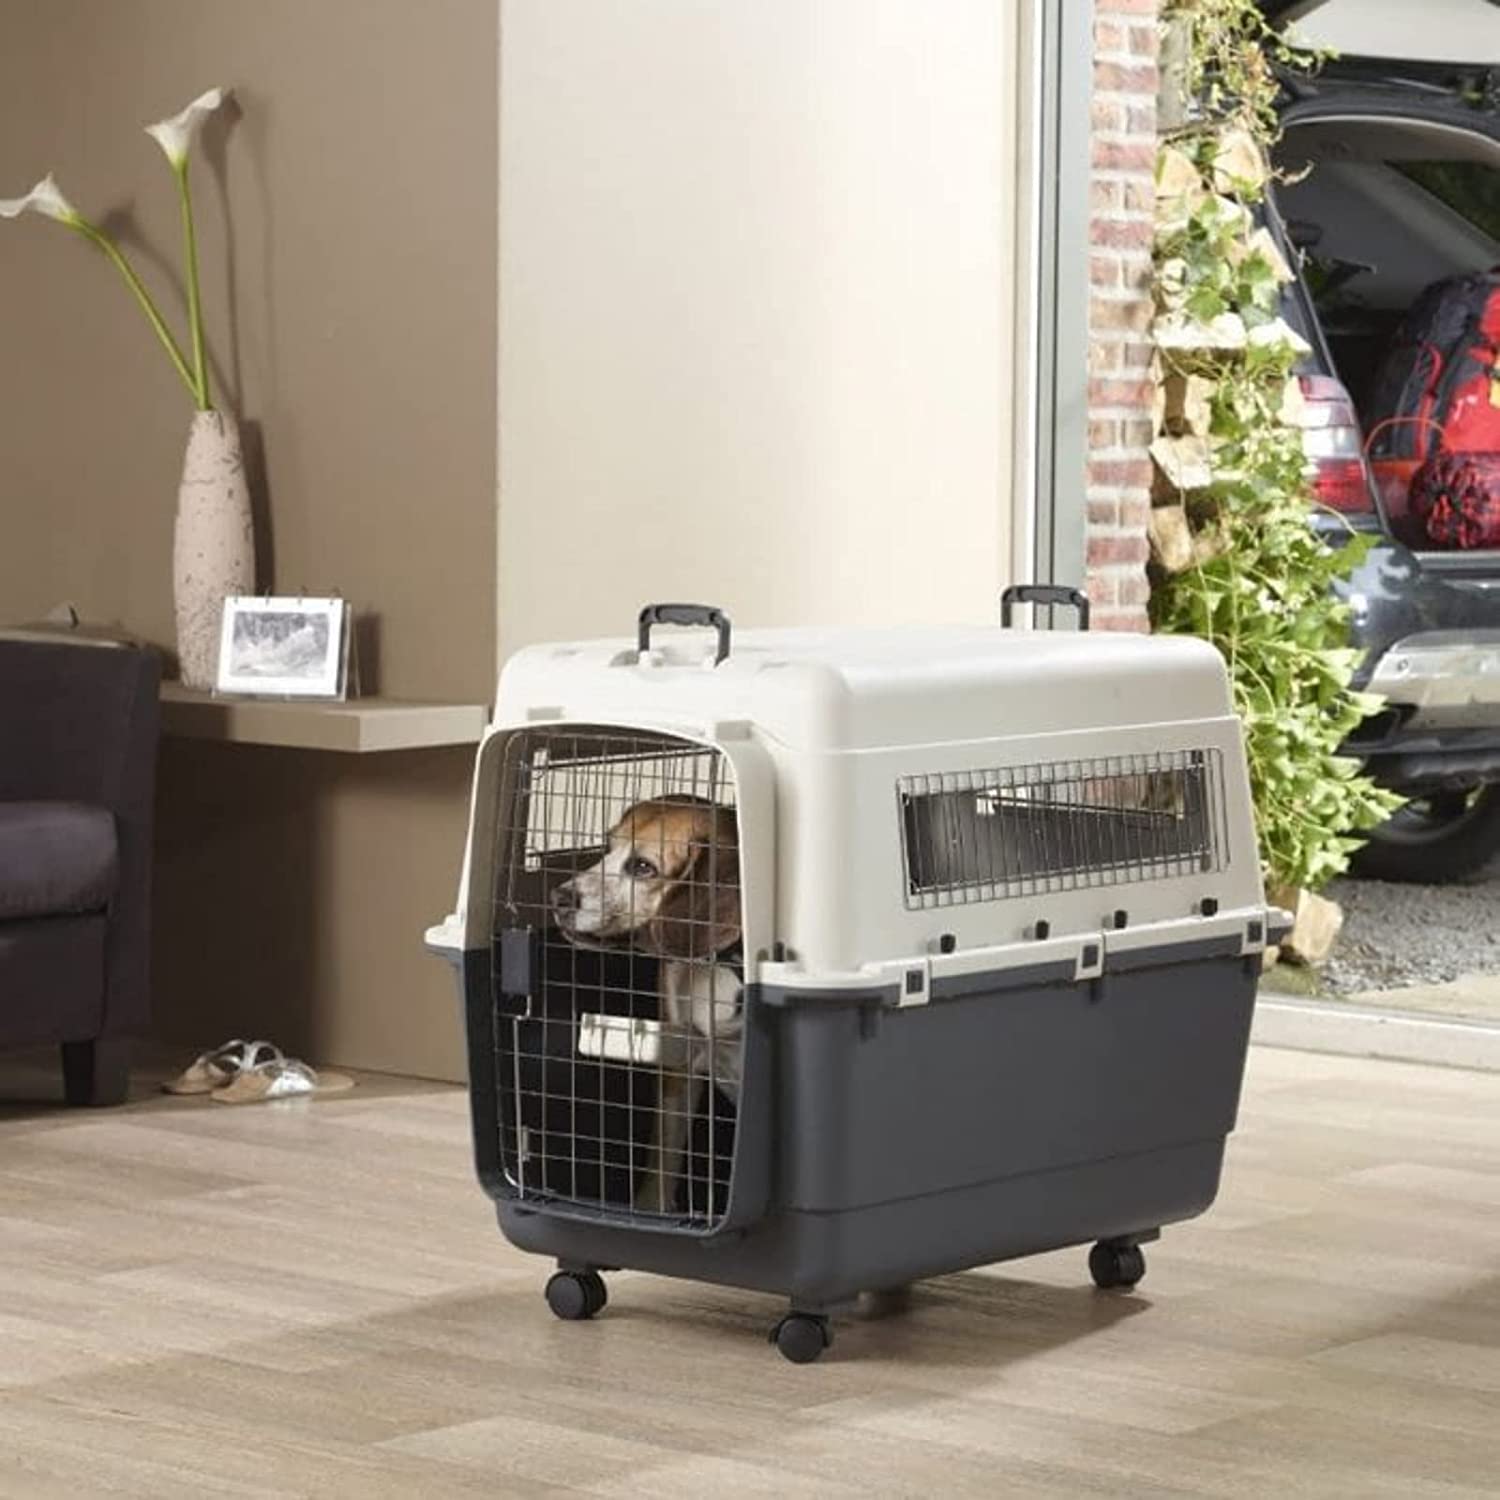 Savic Pet Carrier with Wheels - Andes